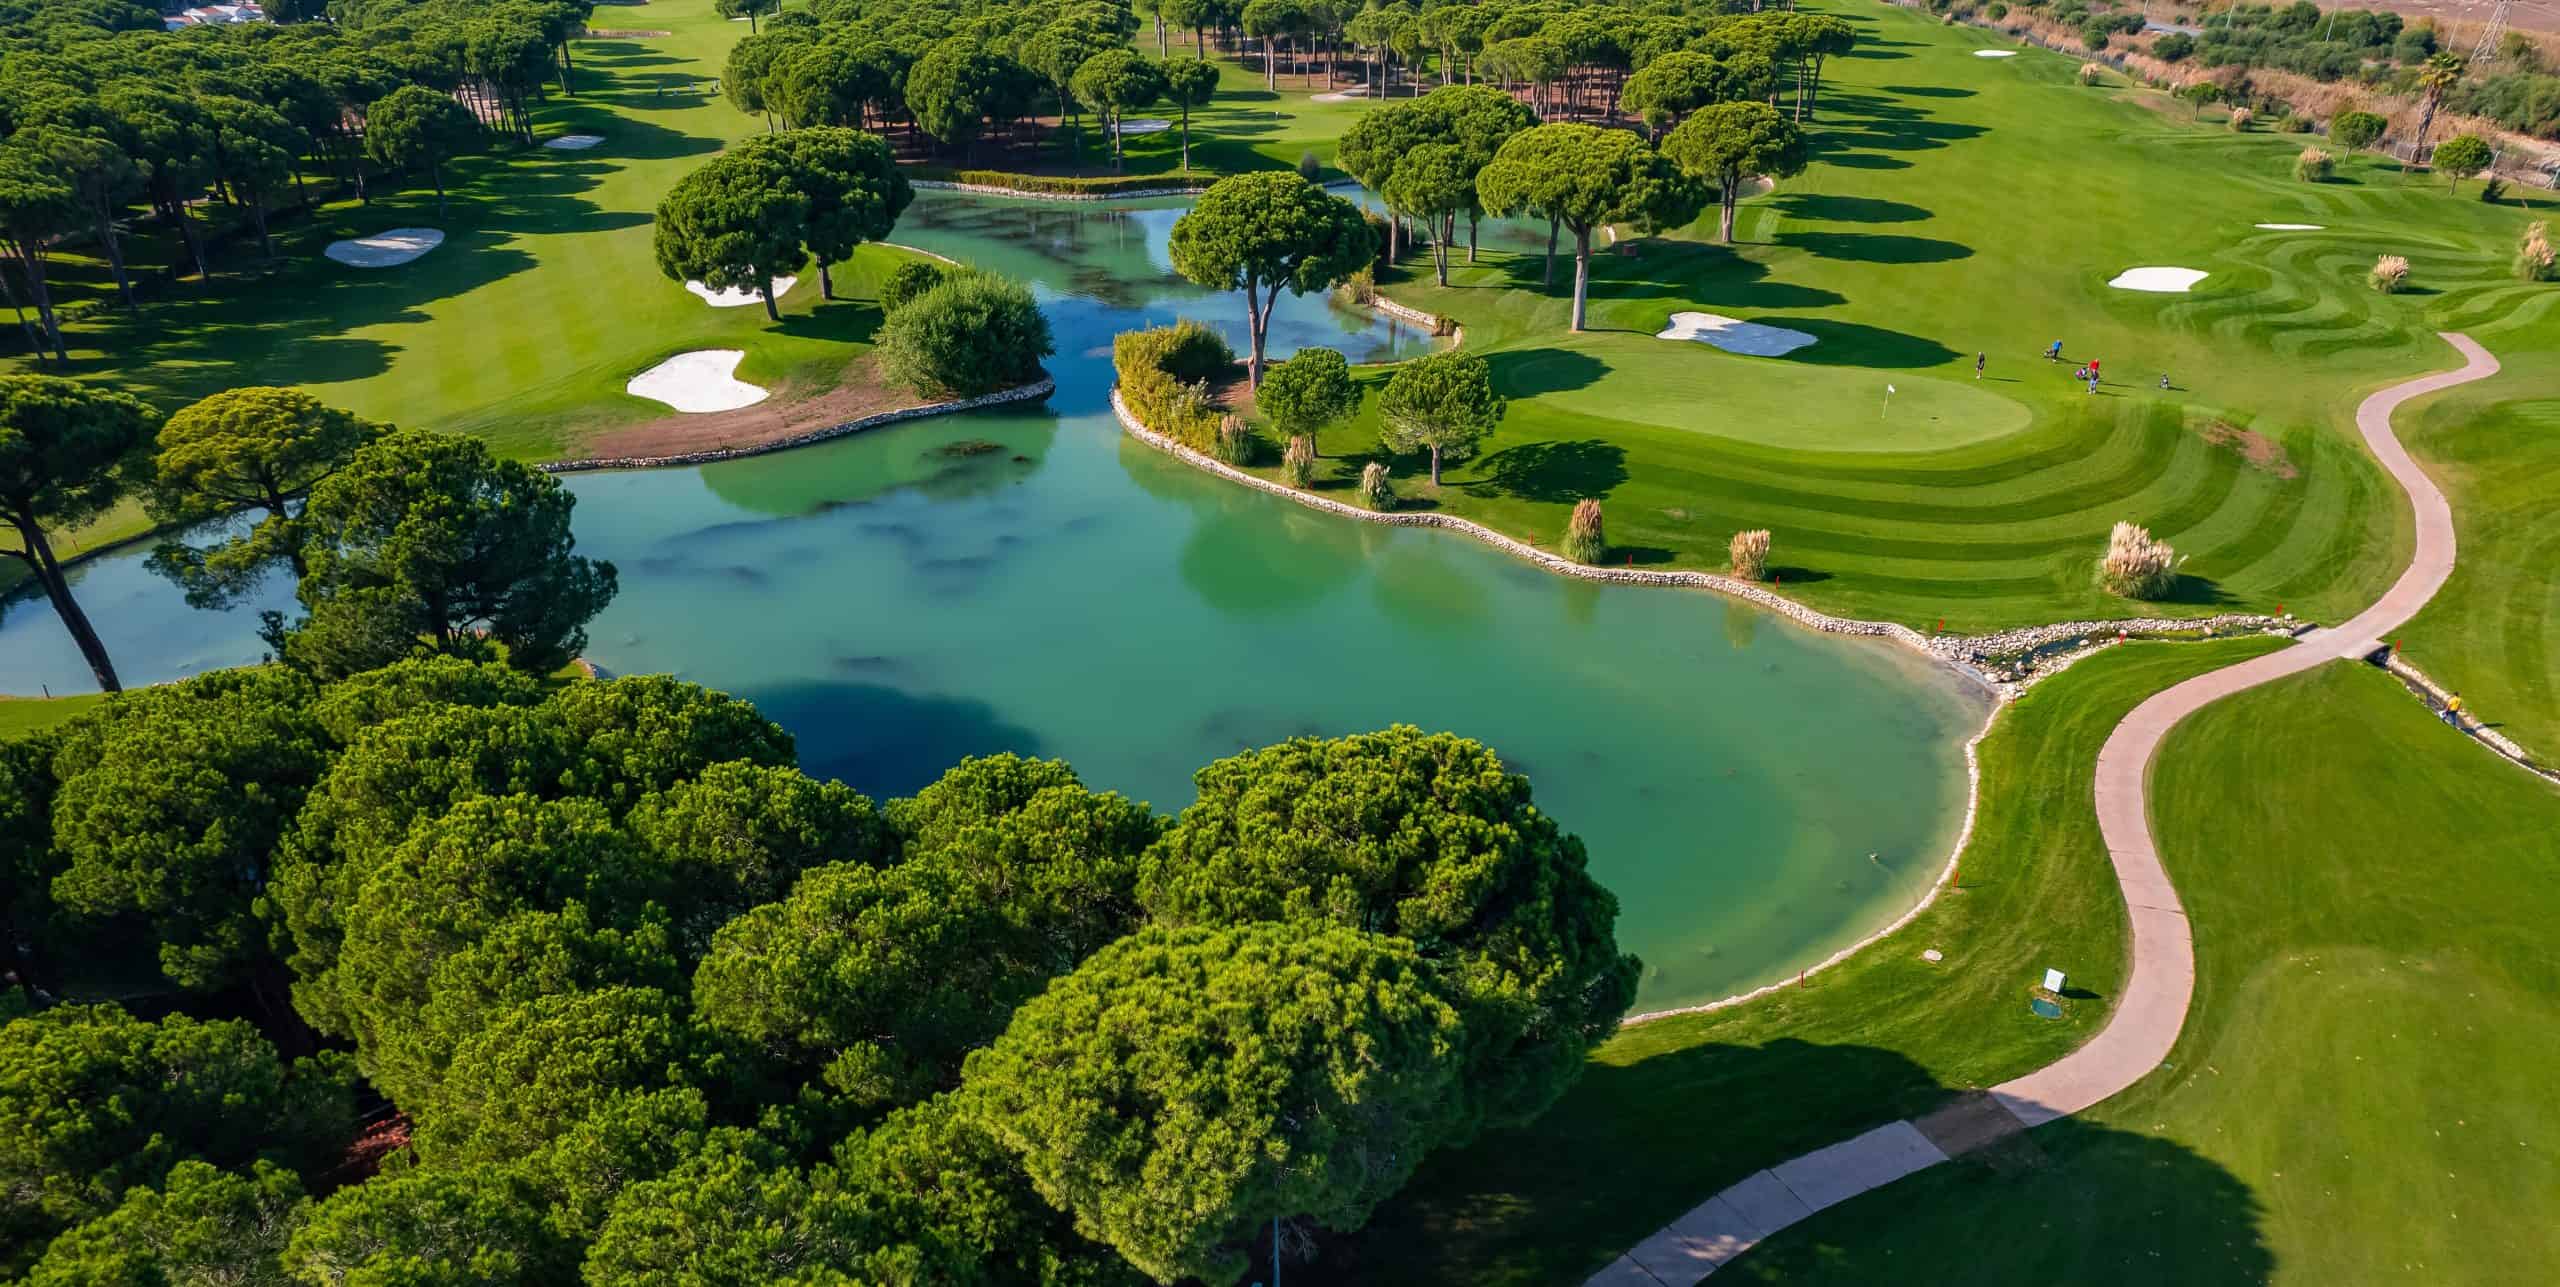 <ul> <li><strong>Where:</strong> Belek, Türkiye</li> </ul> <p>If you have classy taste and high expectations about the all-inclusive resort you intend to stay at, you should be looking at five-star options like Voyage Belek Golf & Spa. This stunning destination has much offer including a golf course, tennis courts, and winding waterslides.</p> <p>It's unlikely you'll <em>ever</em> run out of fun things to do there. The restaurant is open 24 hours, which means you can order food to satisfy your craving at 3 in the morning if you feel like it. Other enticing draws of Voyage Belek Golf & Spa are the steam room, the sauna, the spa, and the overall architectural design.</p>